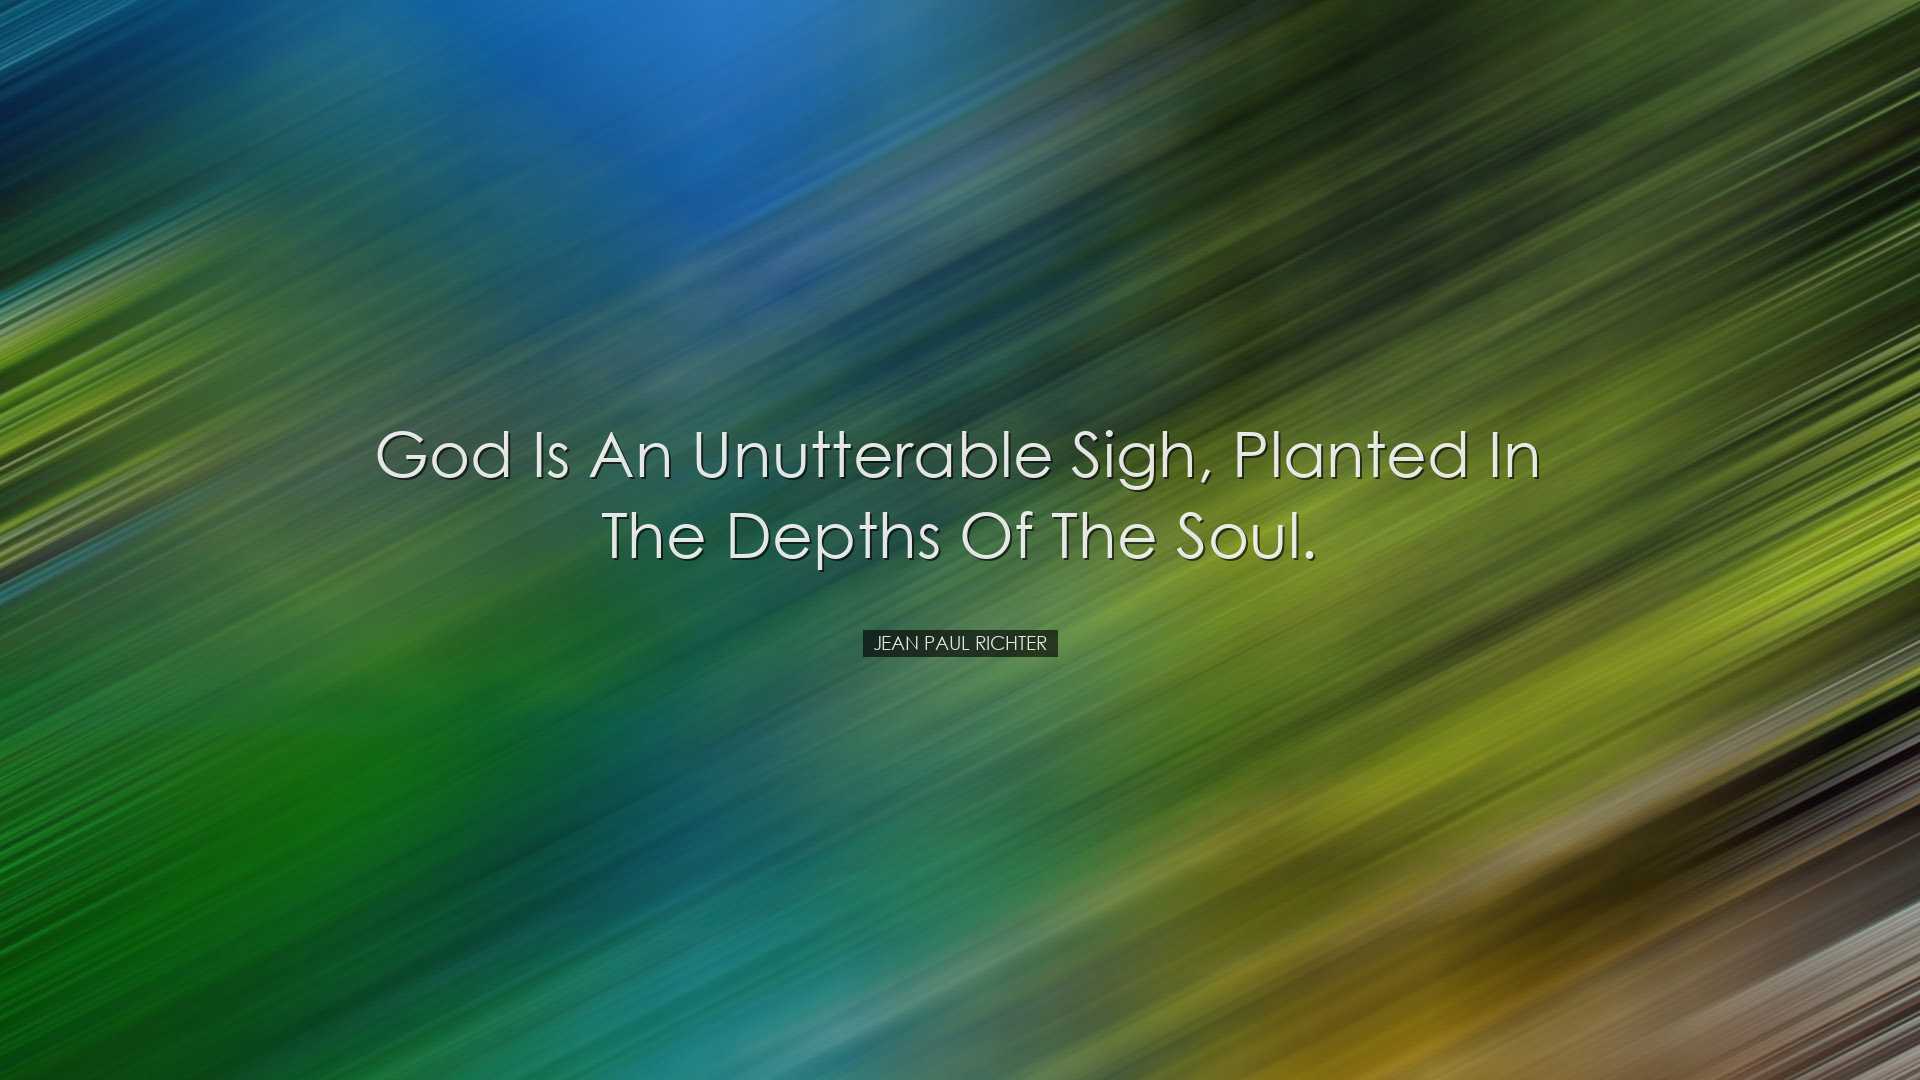 God is an unutterable sigh, planted in the depths of the soul. - J